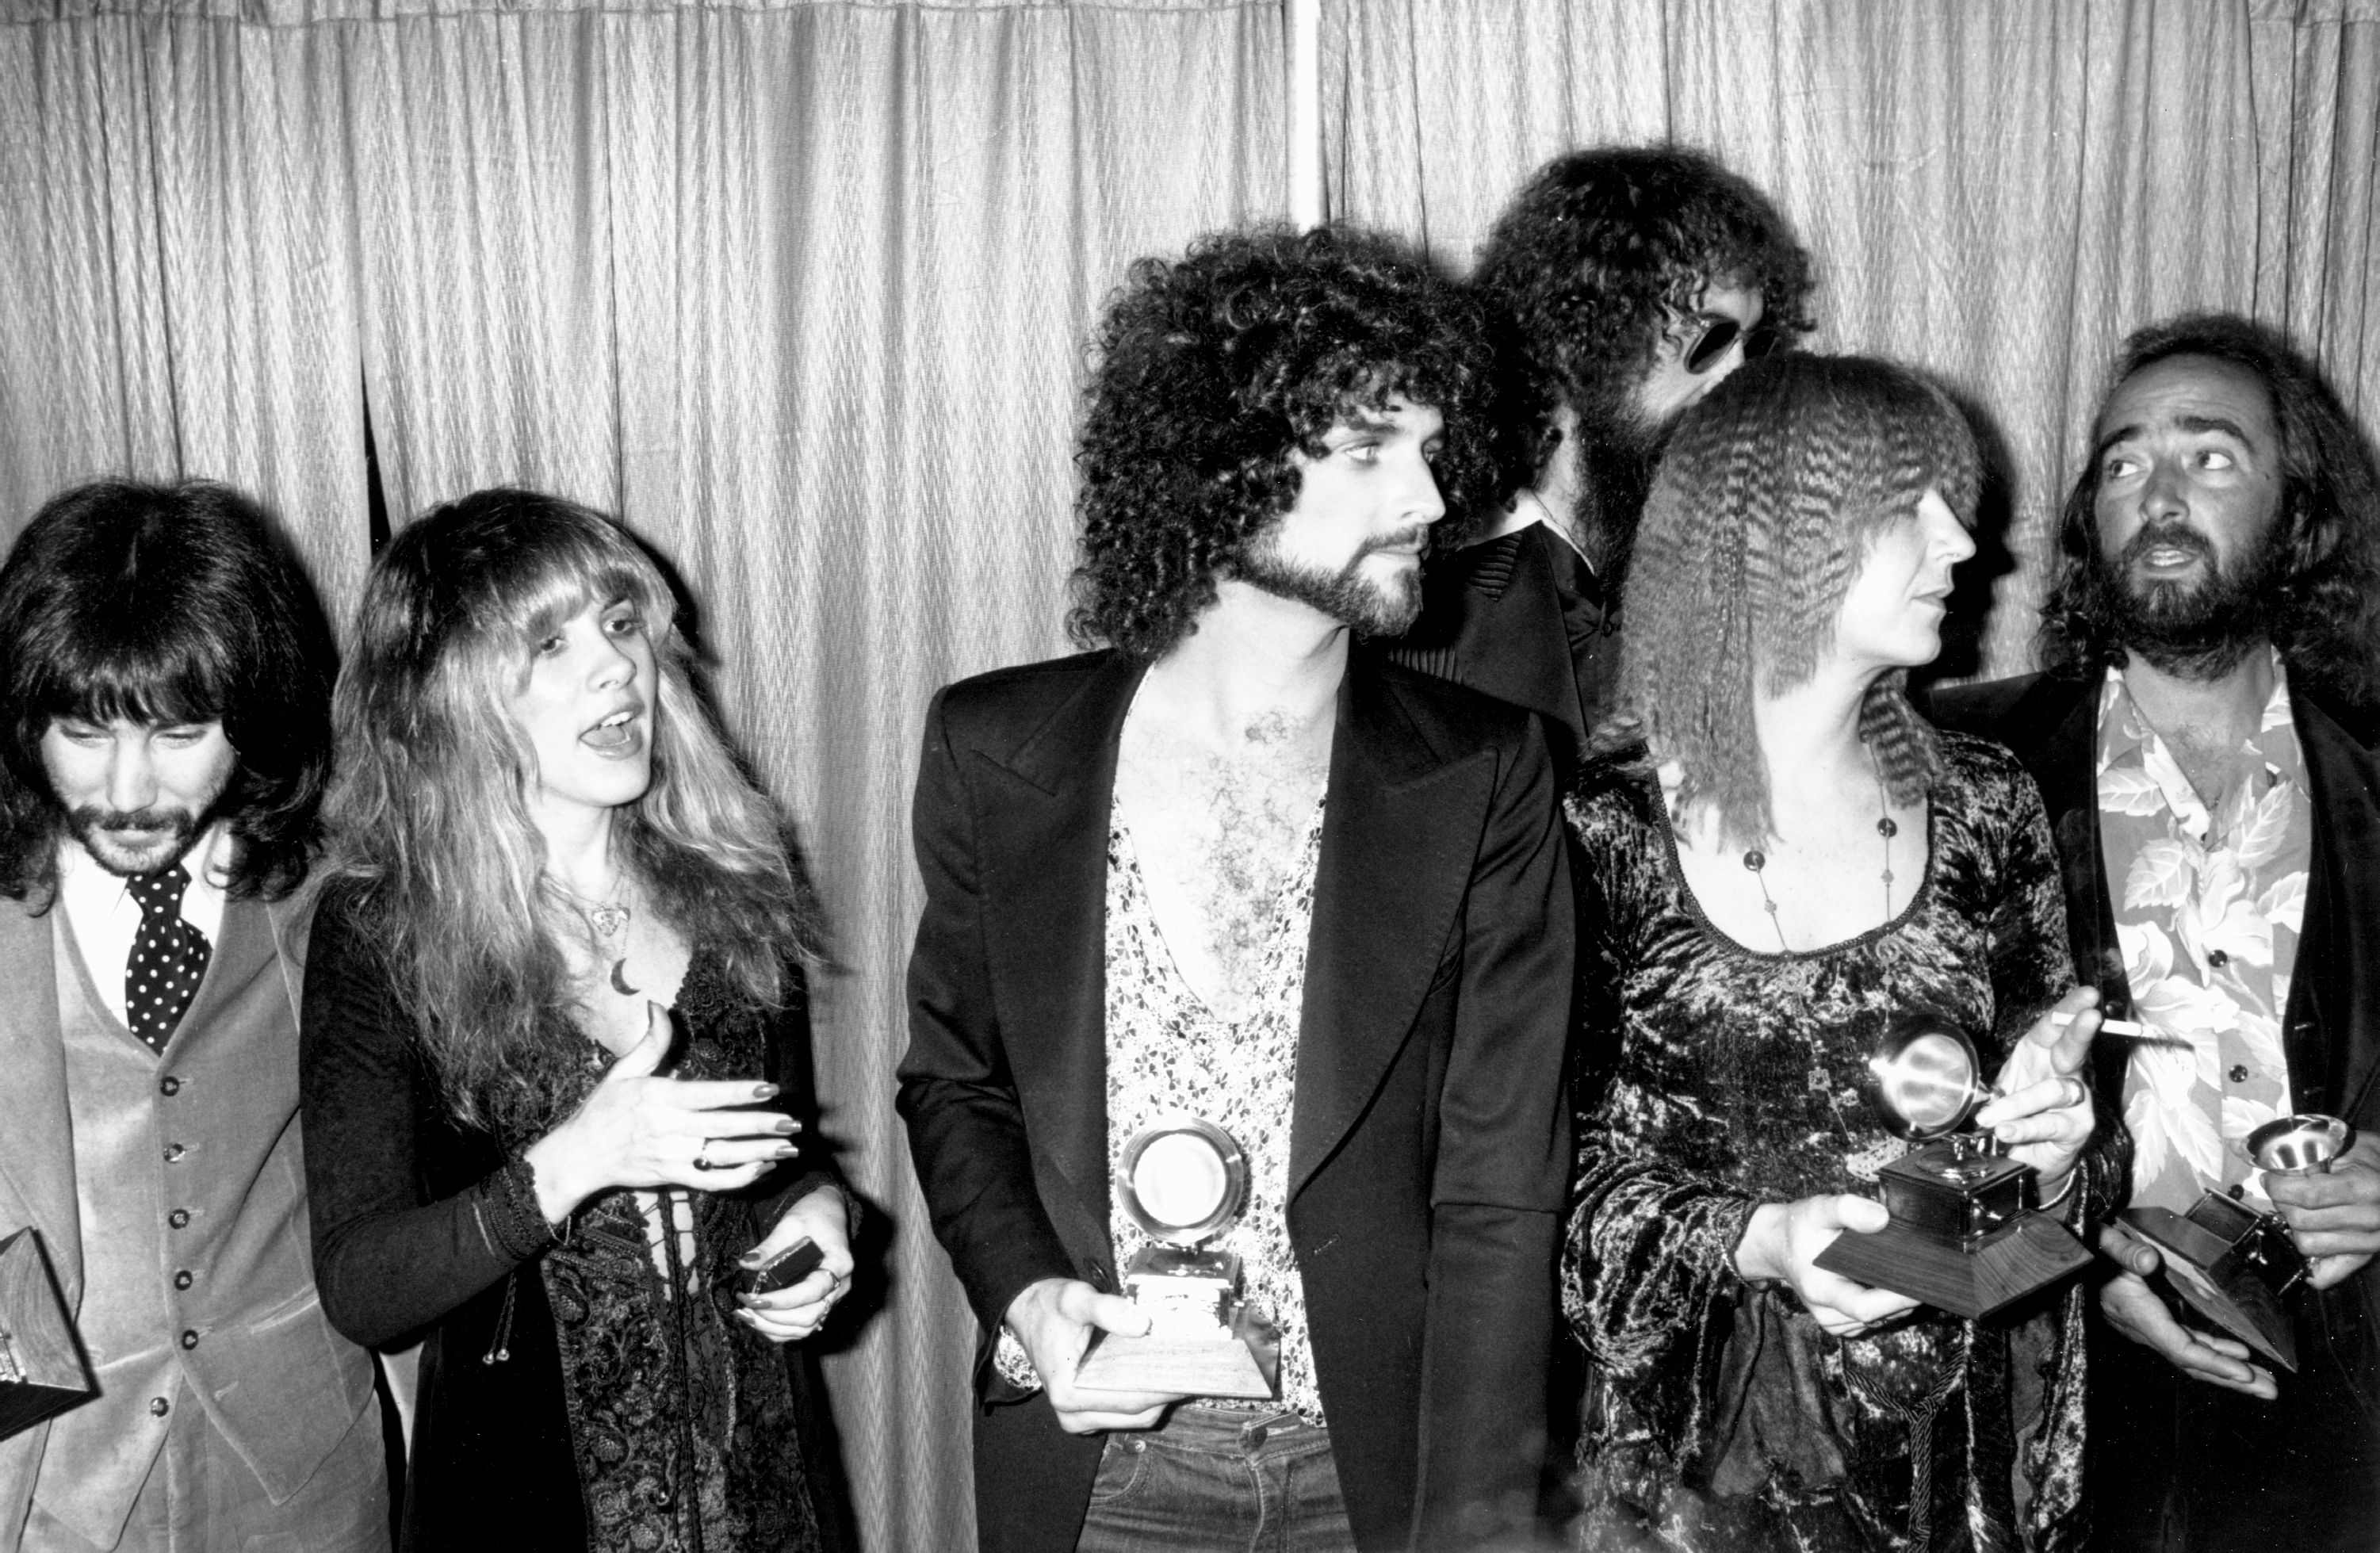 who were the studio musicians for fleetwood mac